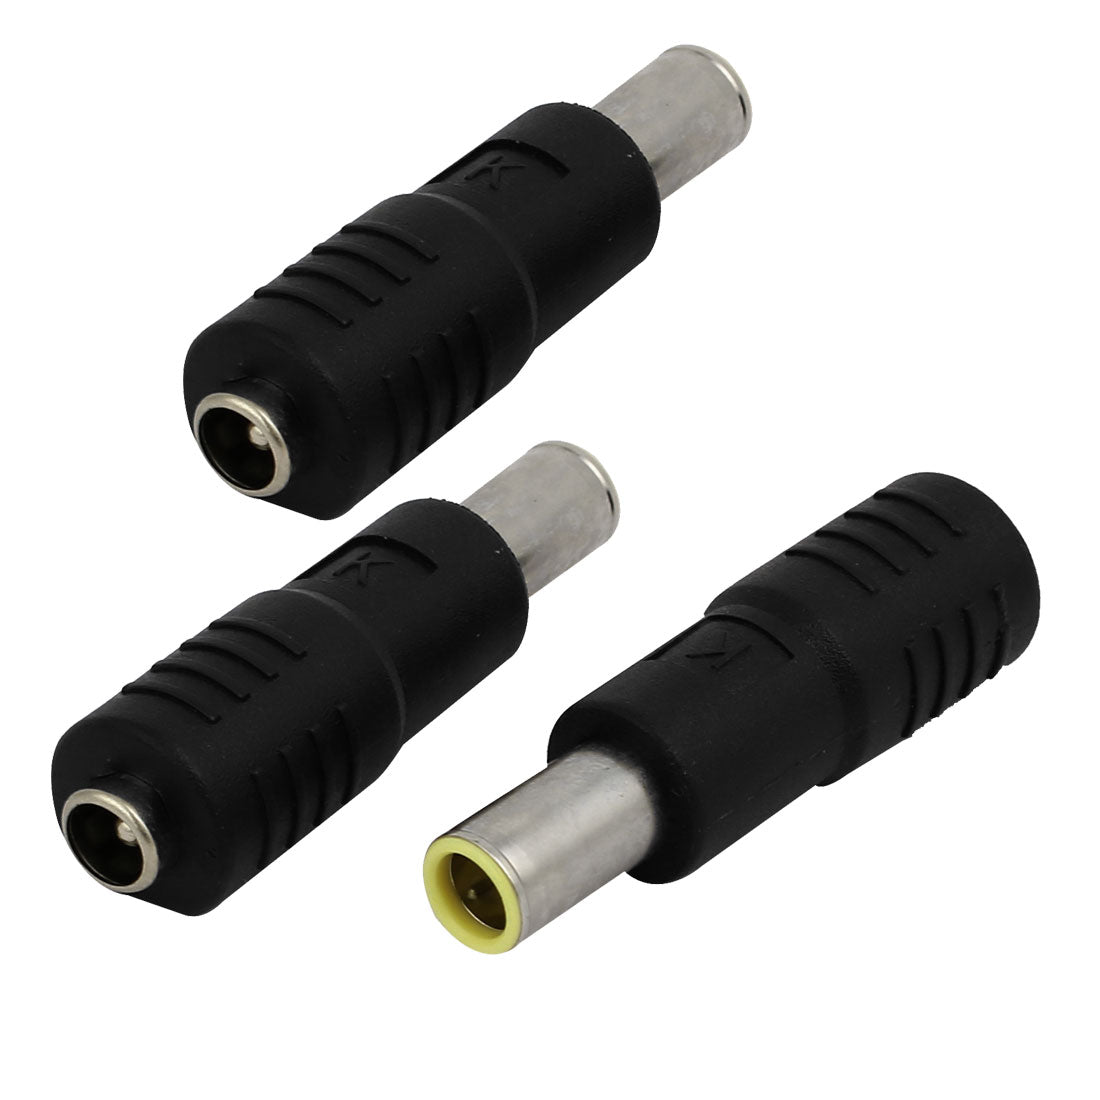 uxcell Uxcell 7.9 x 5.5mm Male to 5.5 x 2.1mm Female DC Power Connector Adapter Jack 3pcs